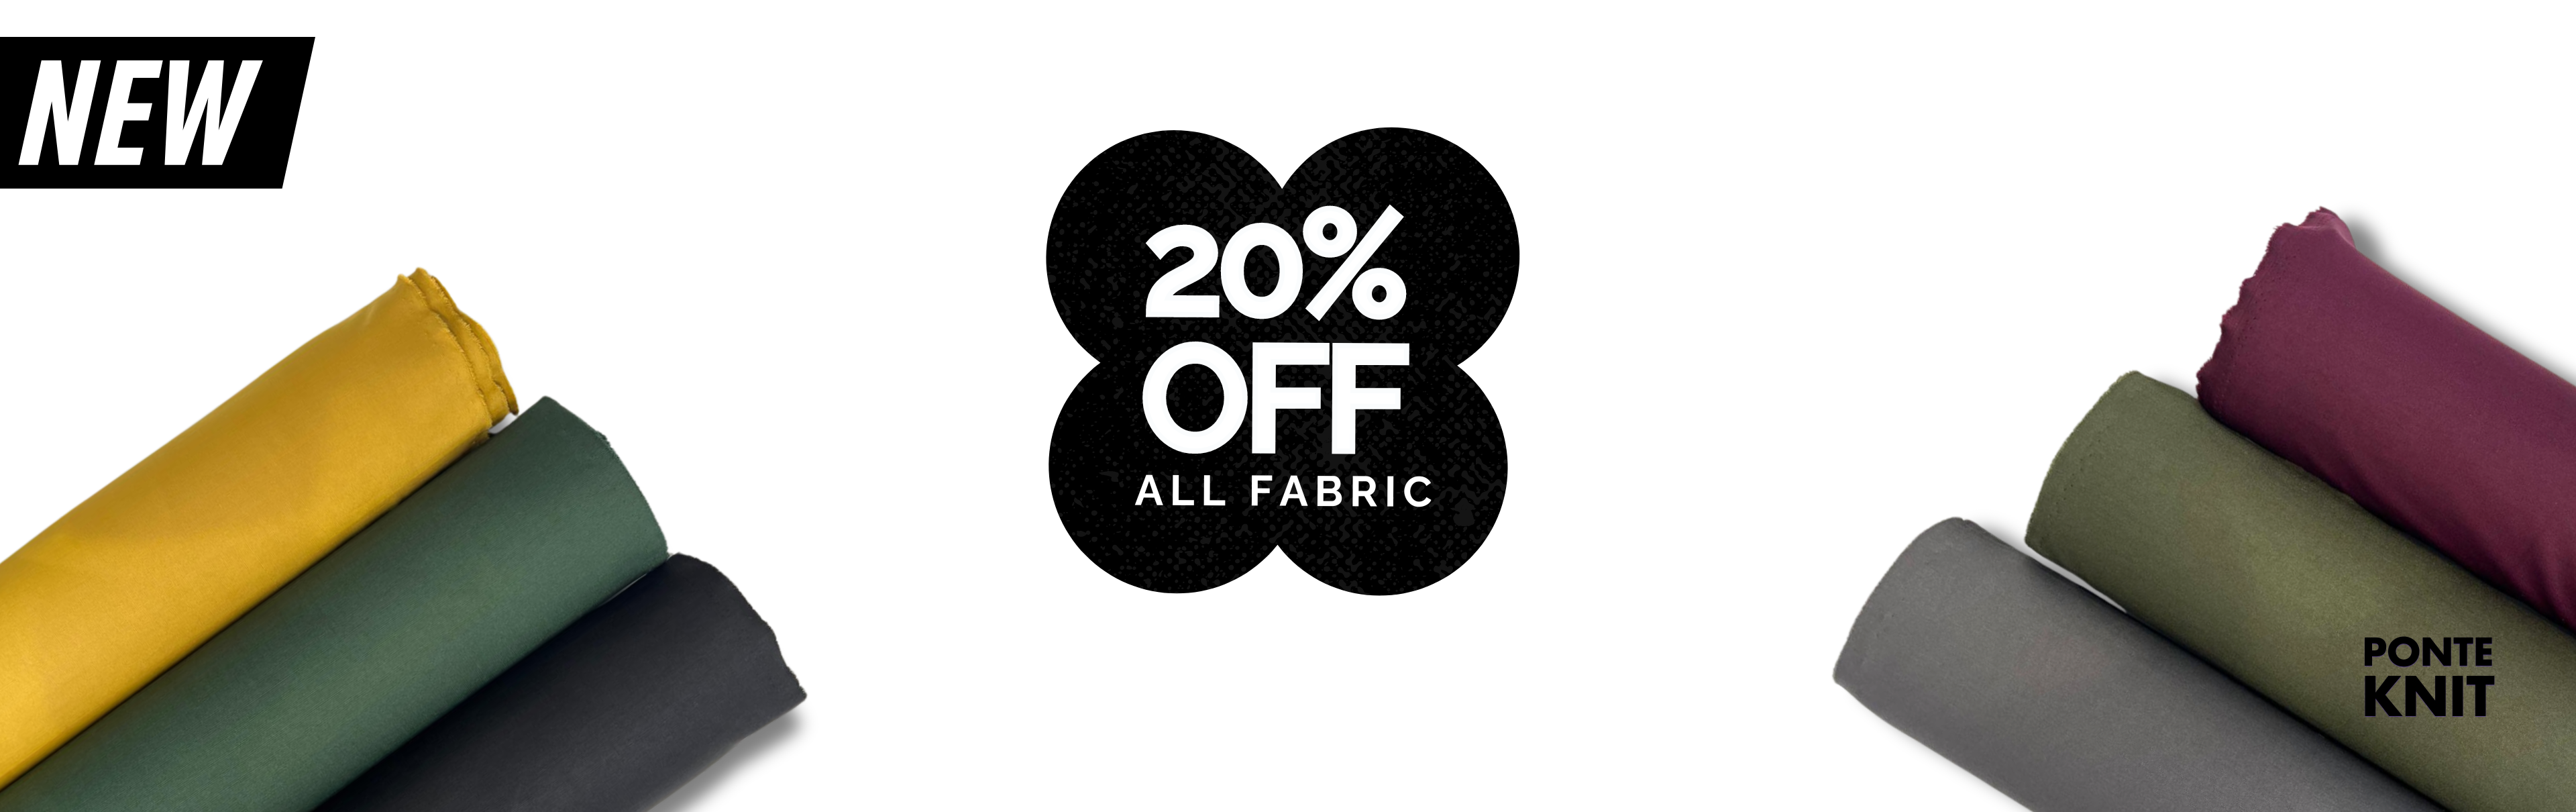 20% Off All Fabric - New Ponte Knit Collection